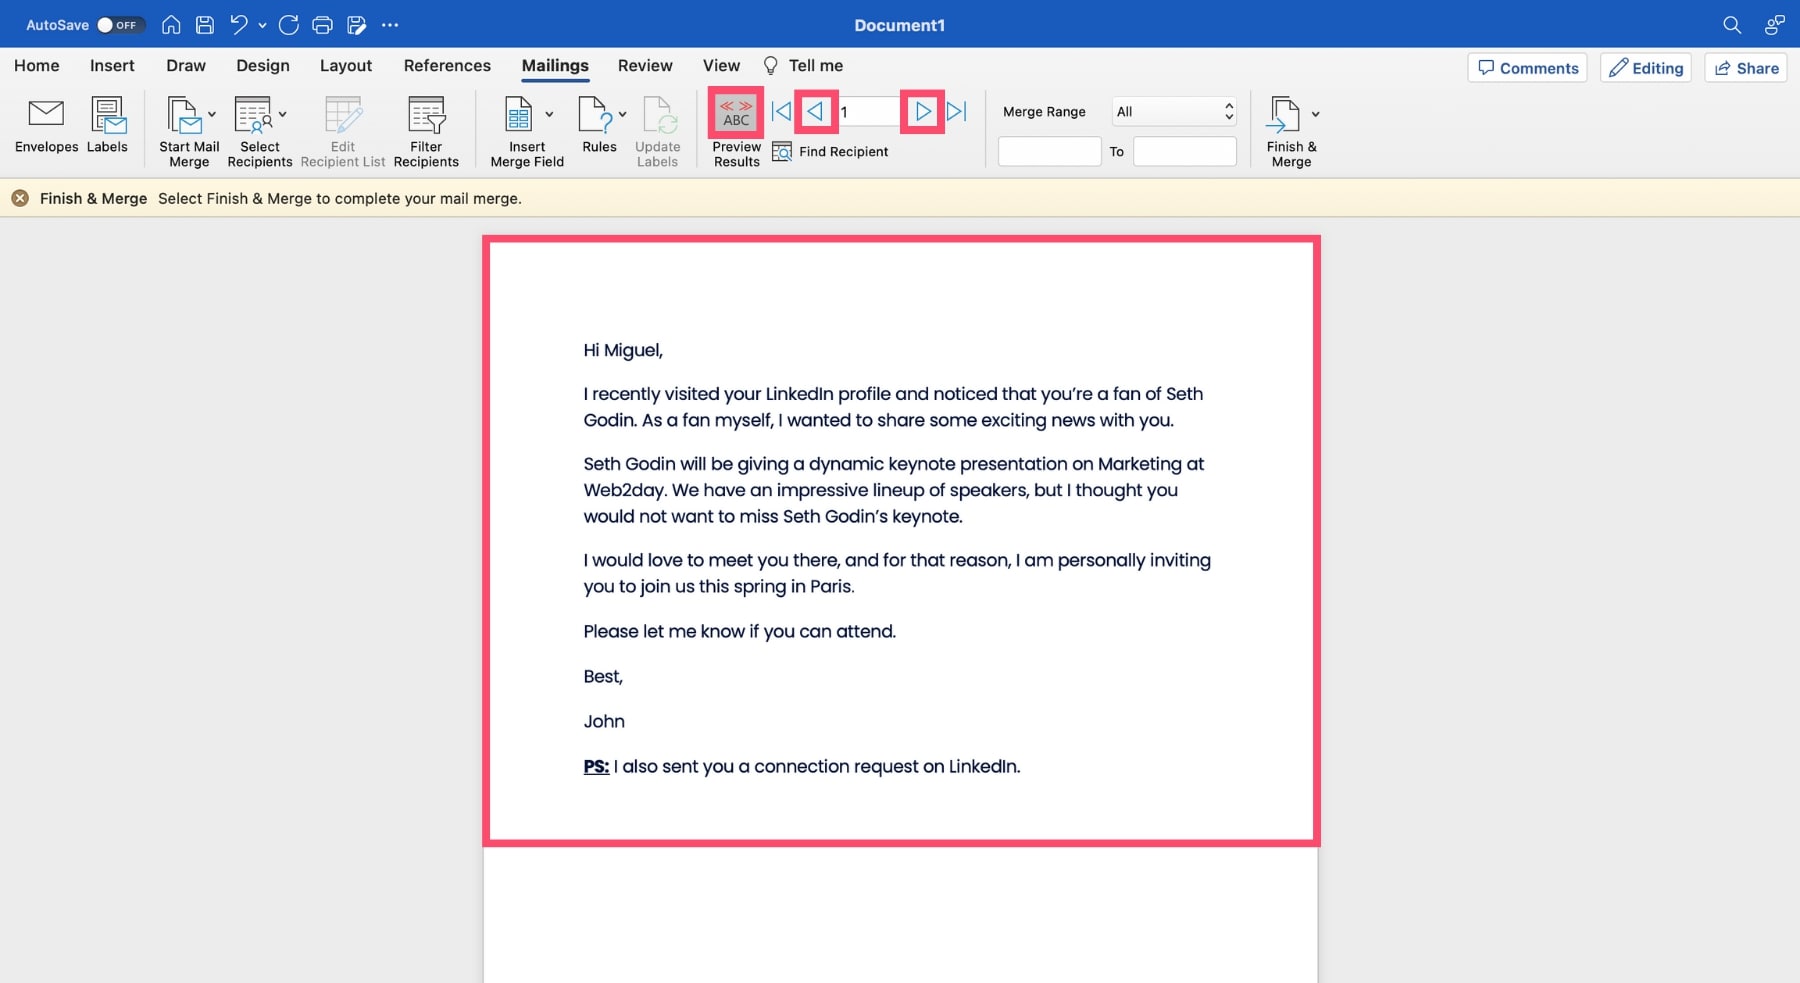 Preview your Excel mail merge in Word